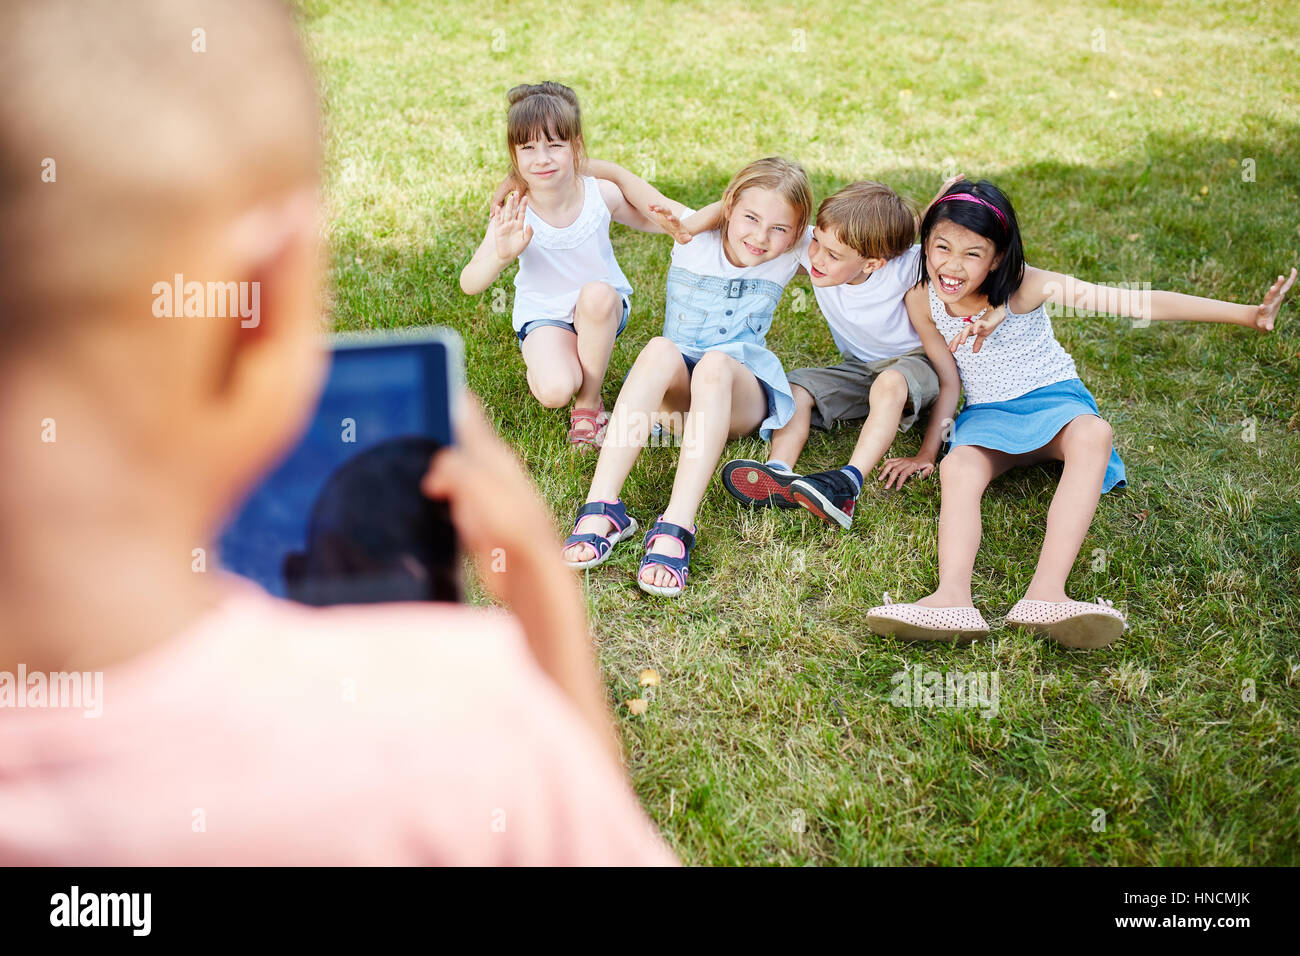 Boy takes group picture of kids at meadow in summer Stock Photo